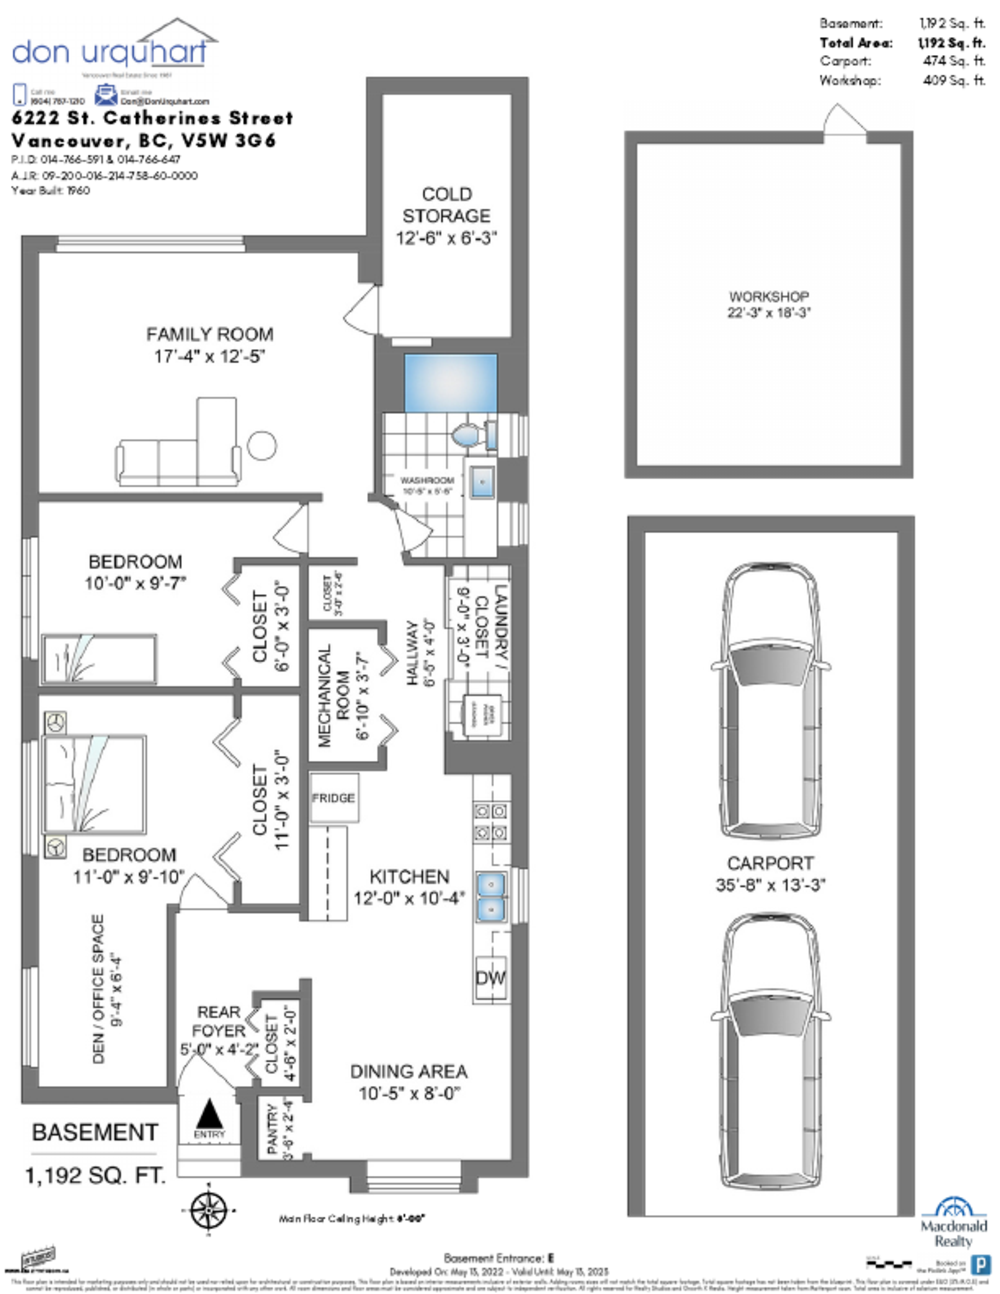 Floor Plan for a 5 Bedroom House in Vancouver